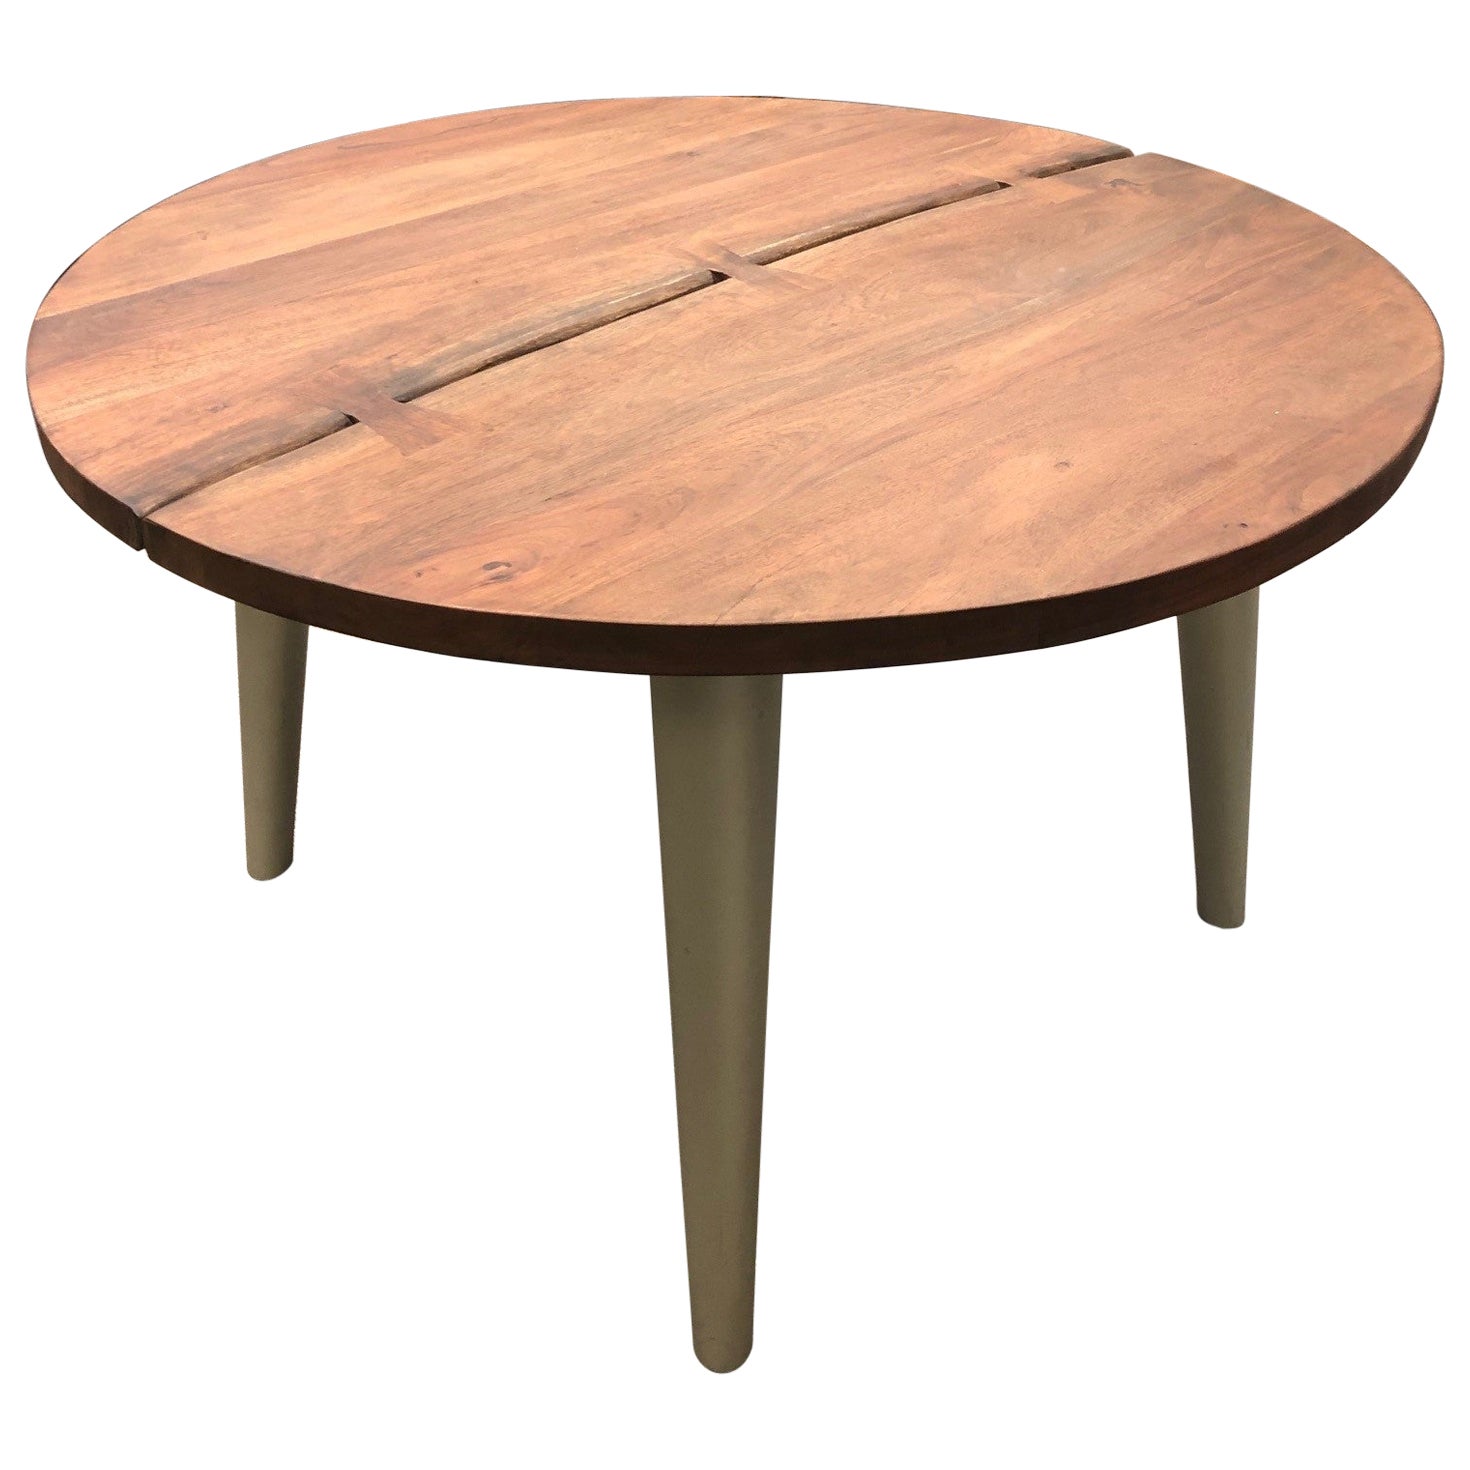 Round Acacia Wood Dining Table on Four Legs from India For Sale